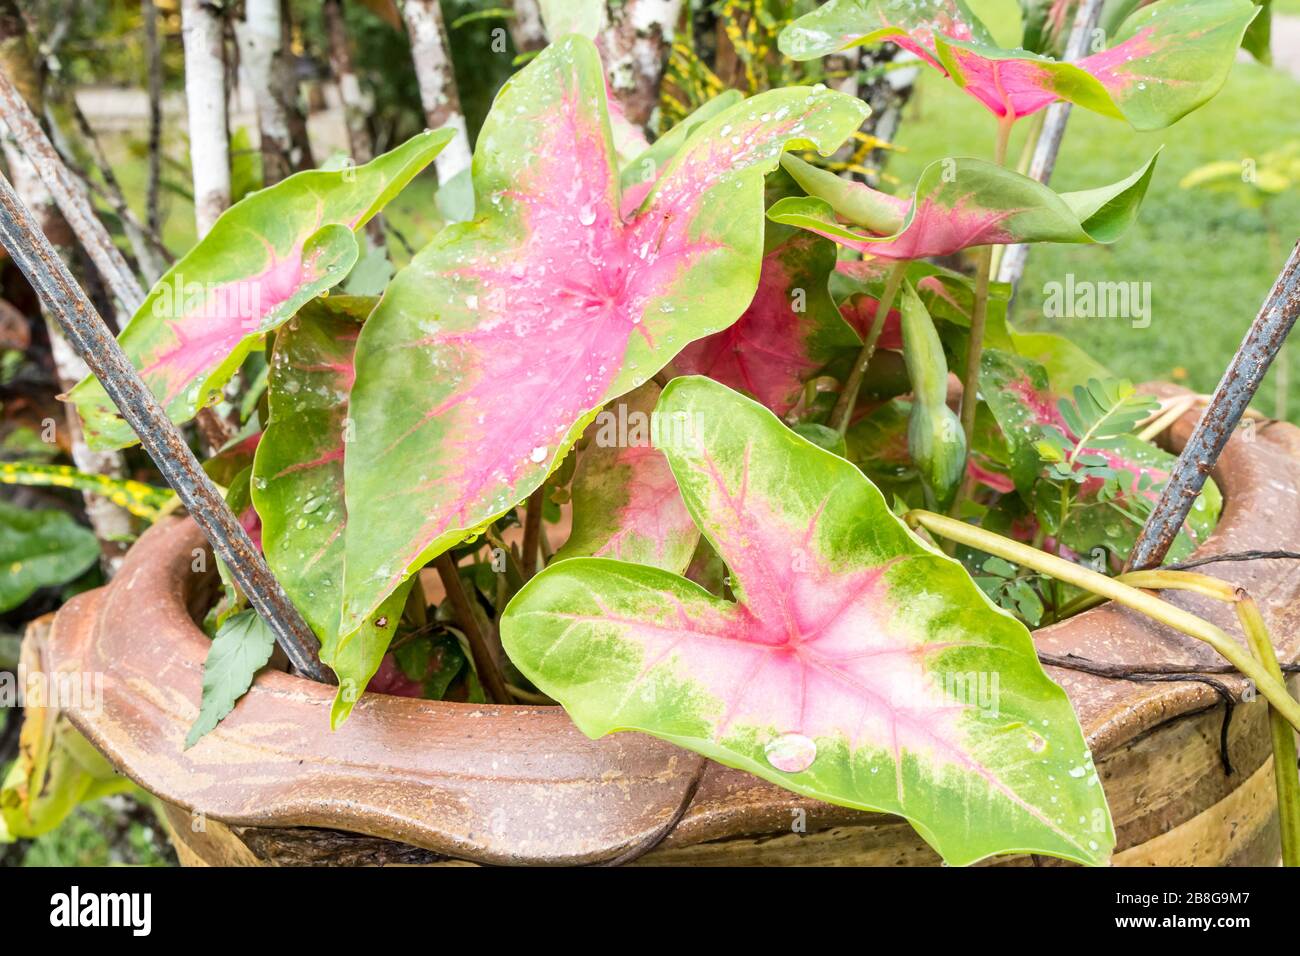 Red and green leaves of caladium plant growing in a pot Stock Photo